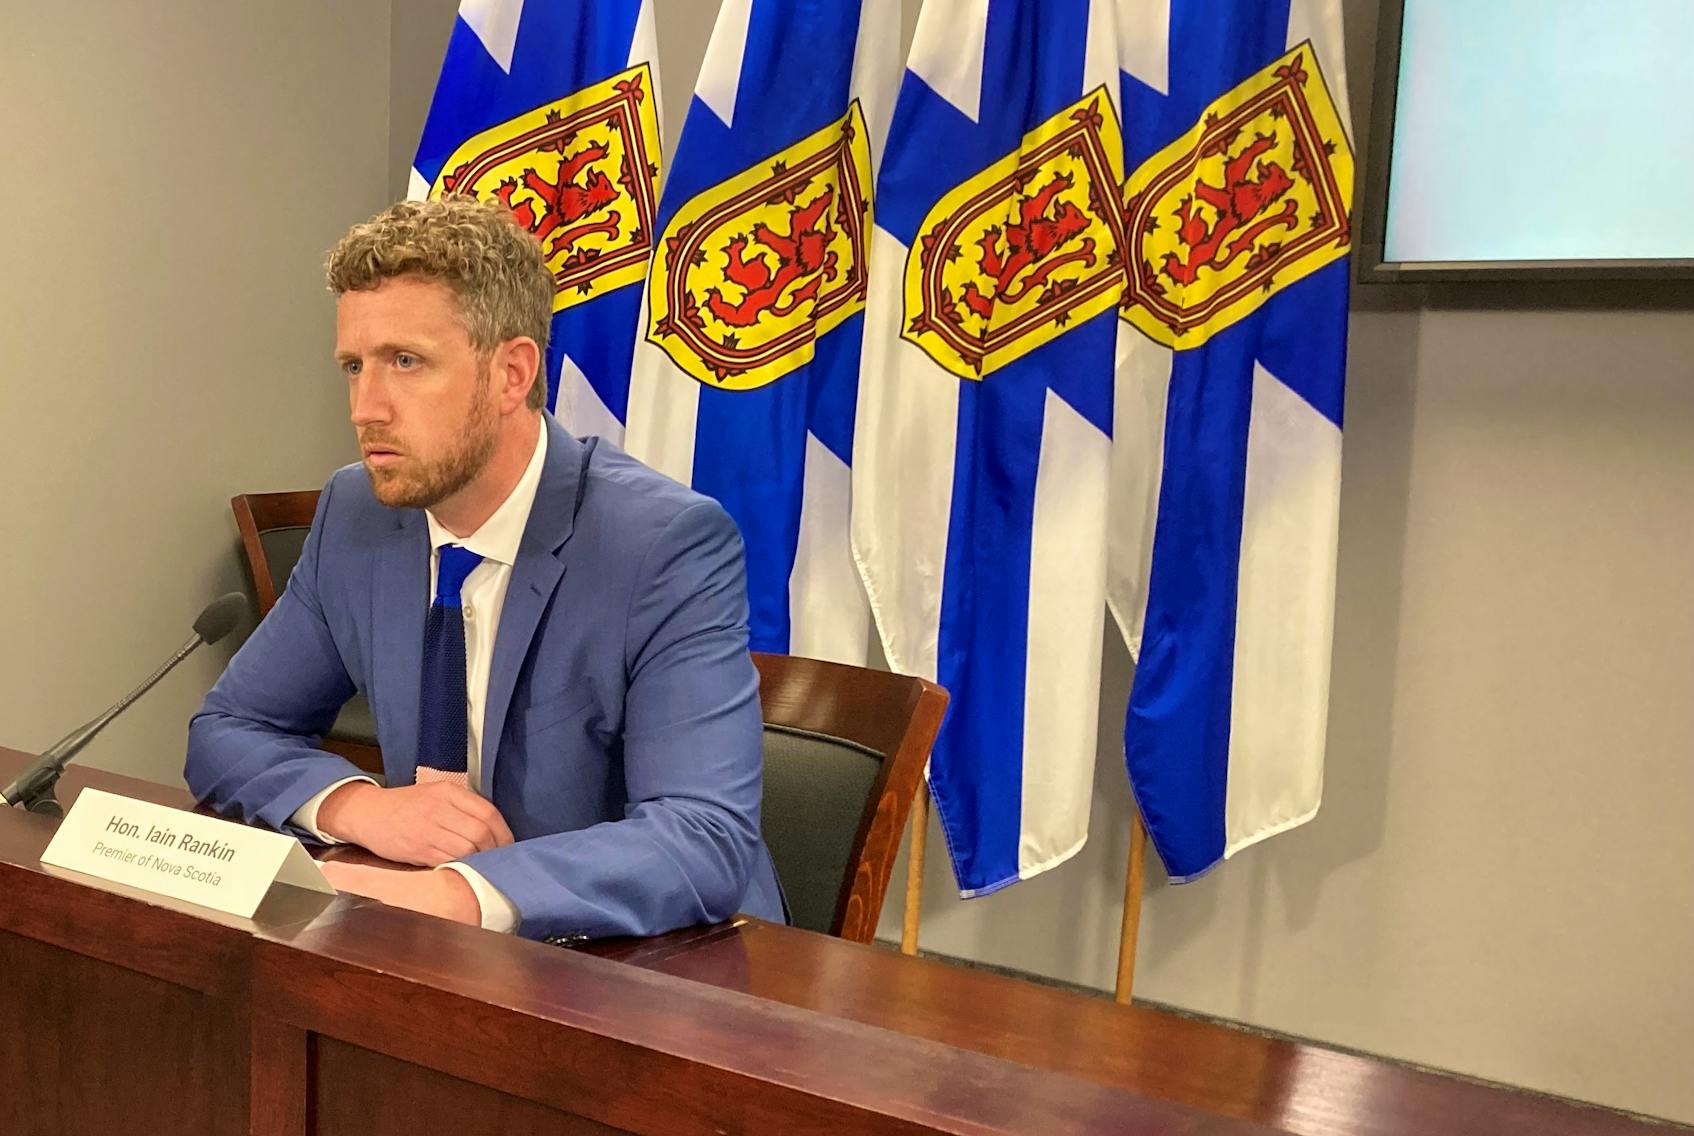 Premier Iain Rankin talks Thursday about looking ahead to the Liberal party's vision of how to take the province to the next level. - Francis Campbell